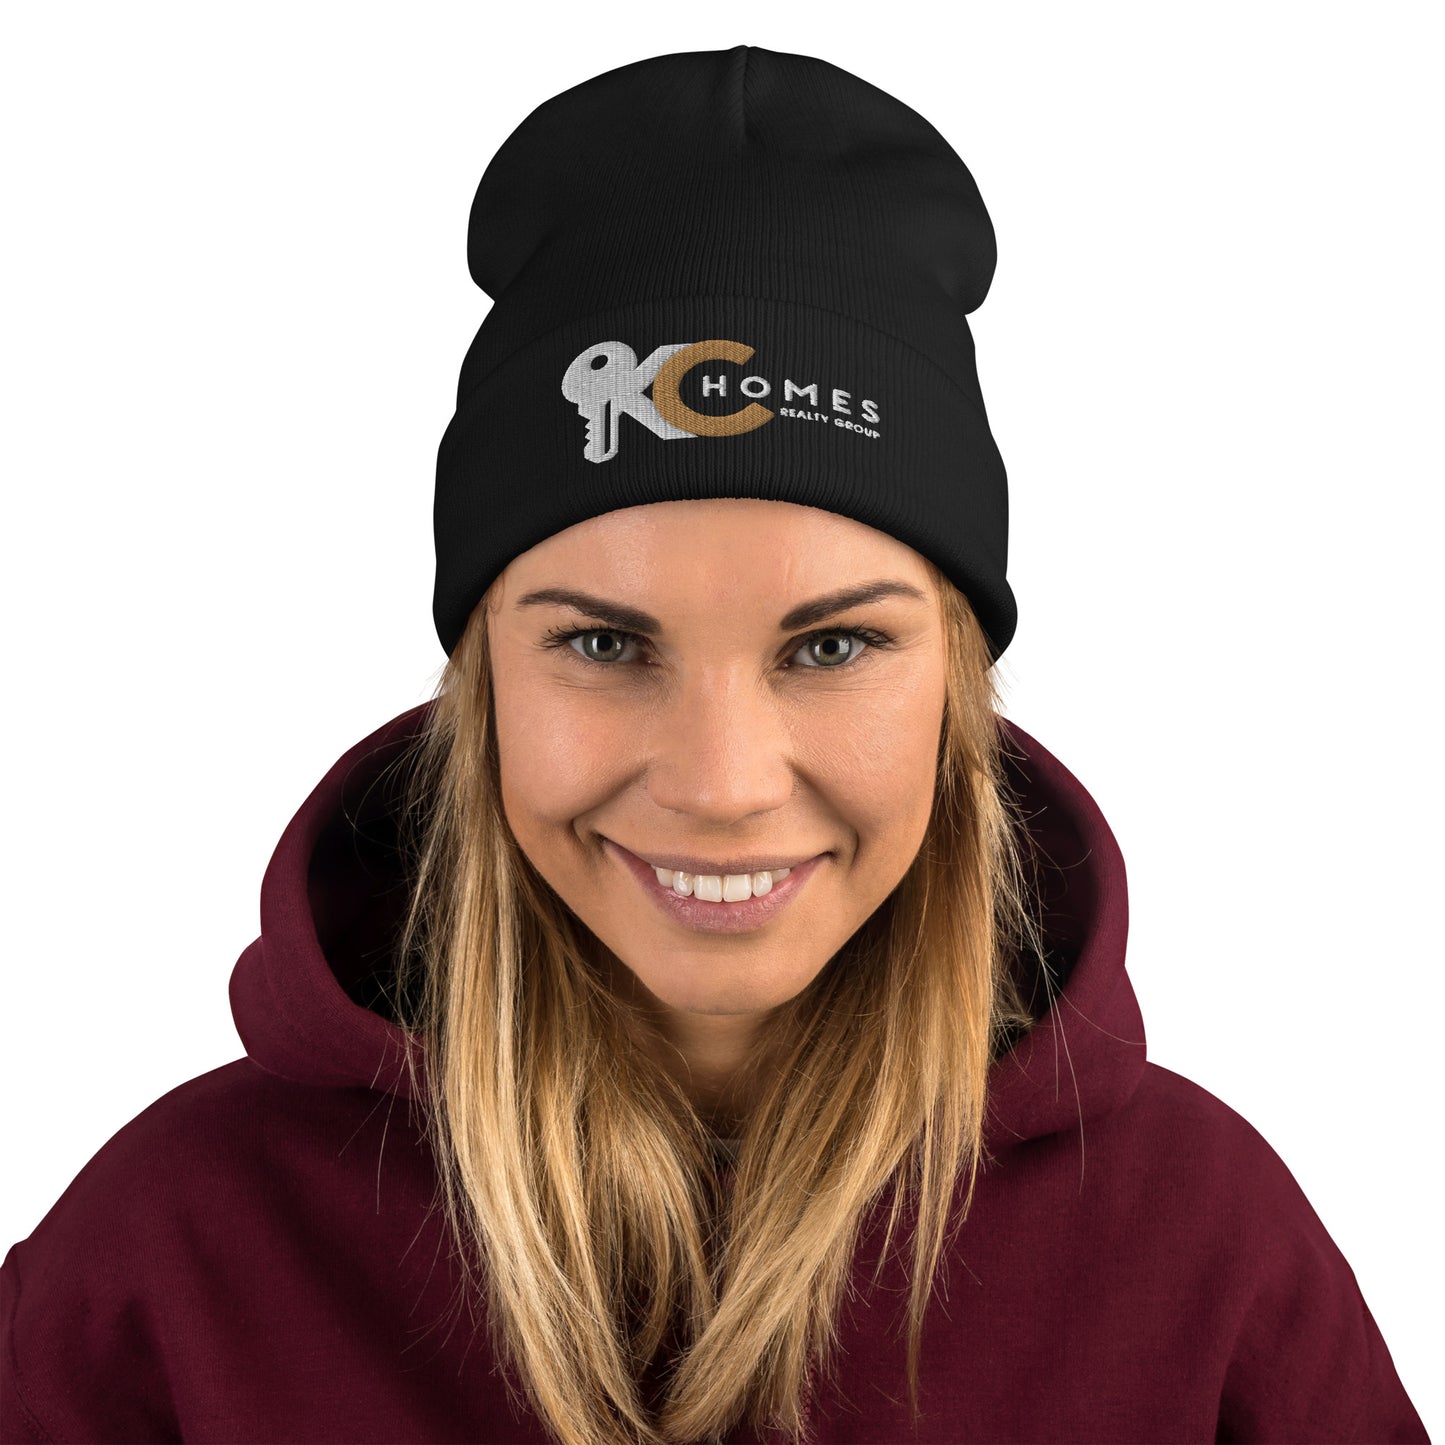 KC Homes Embroidered Beanie